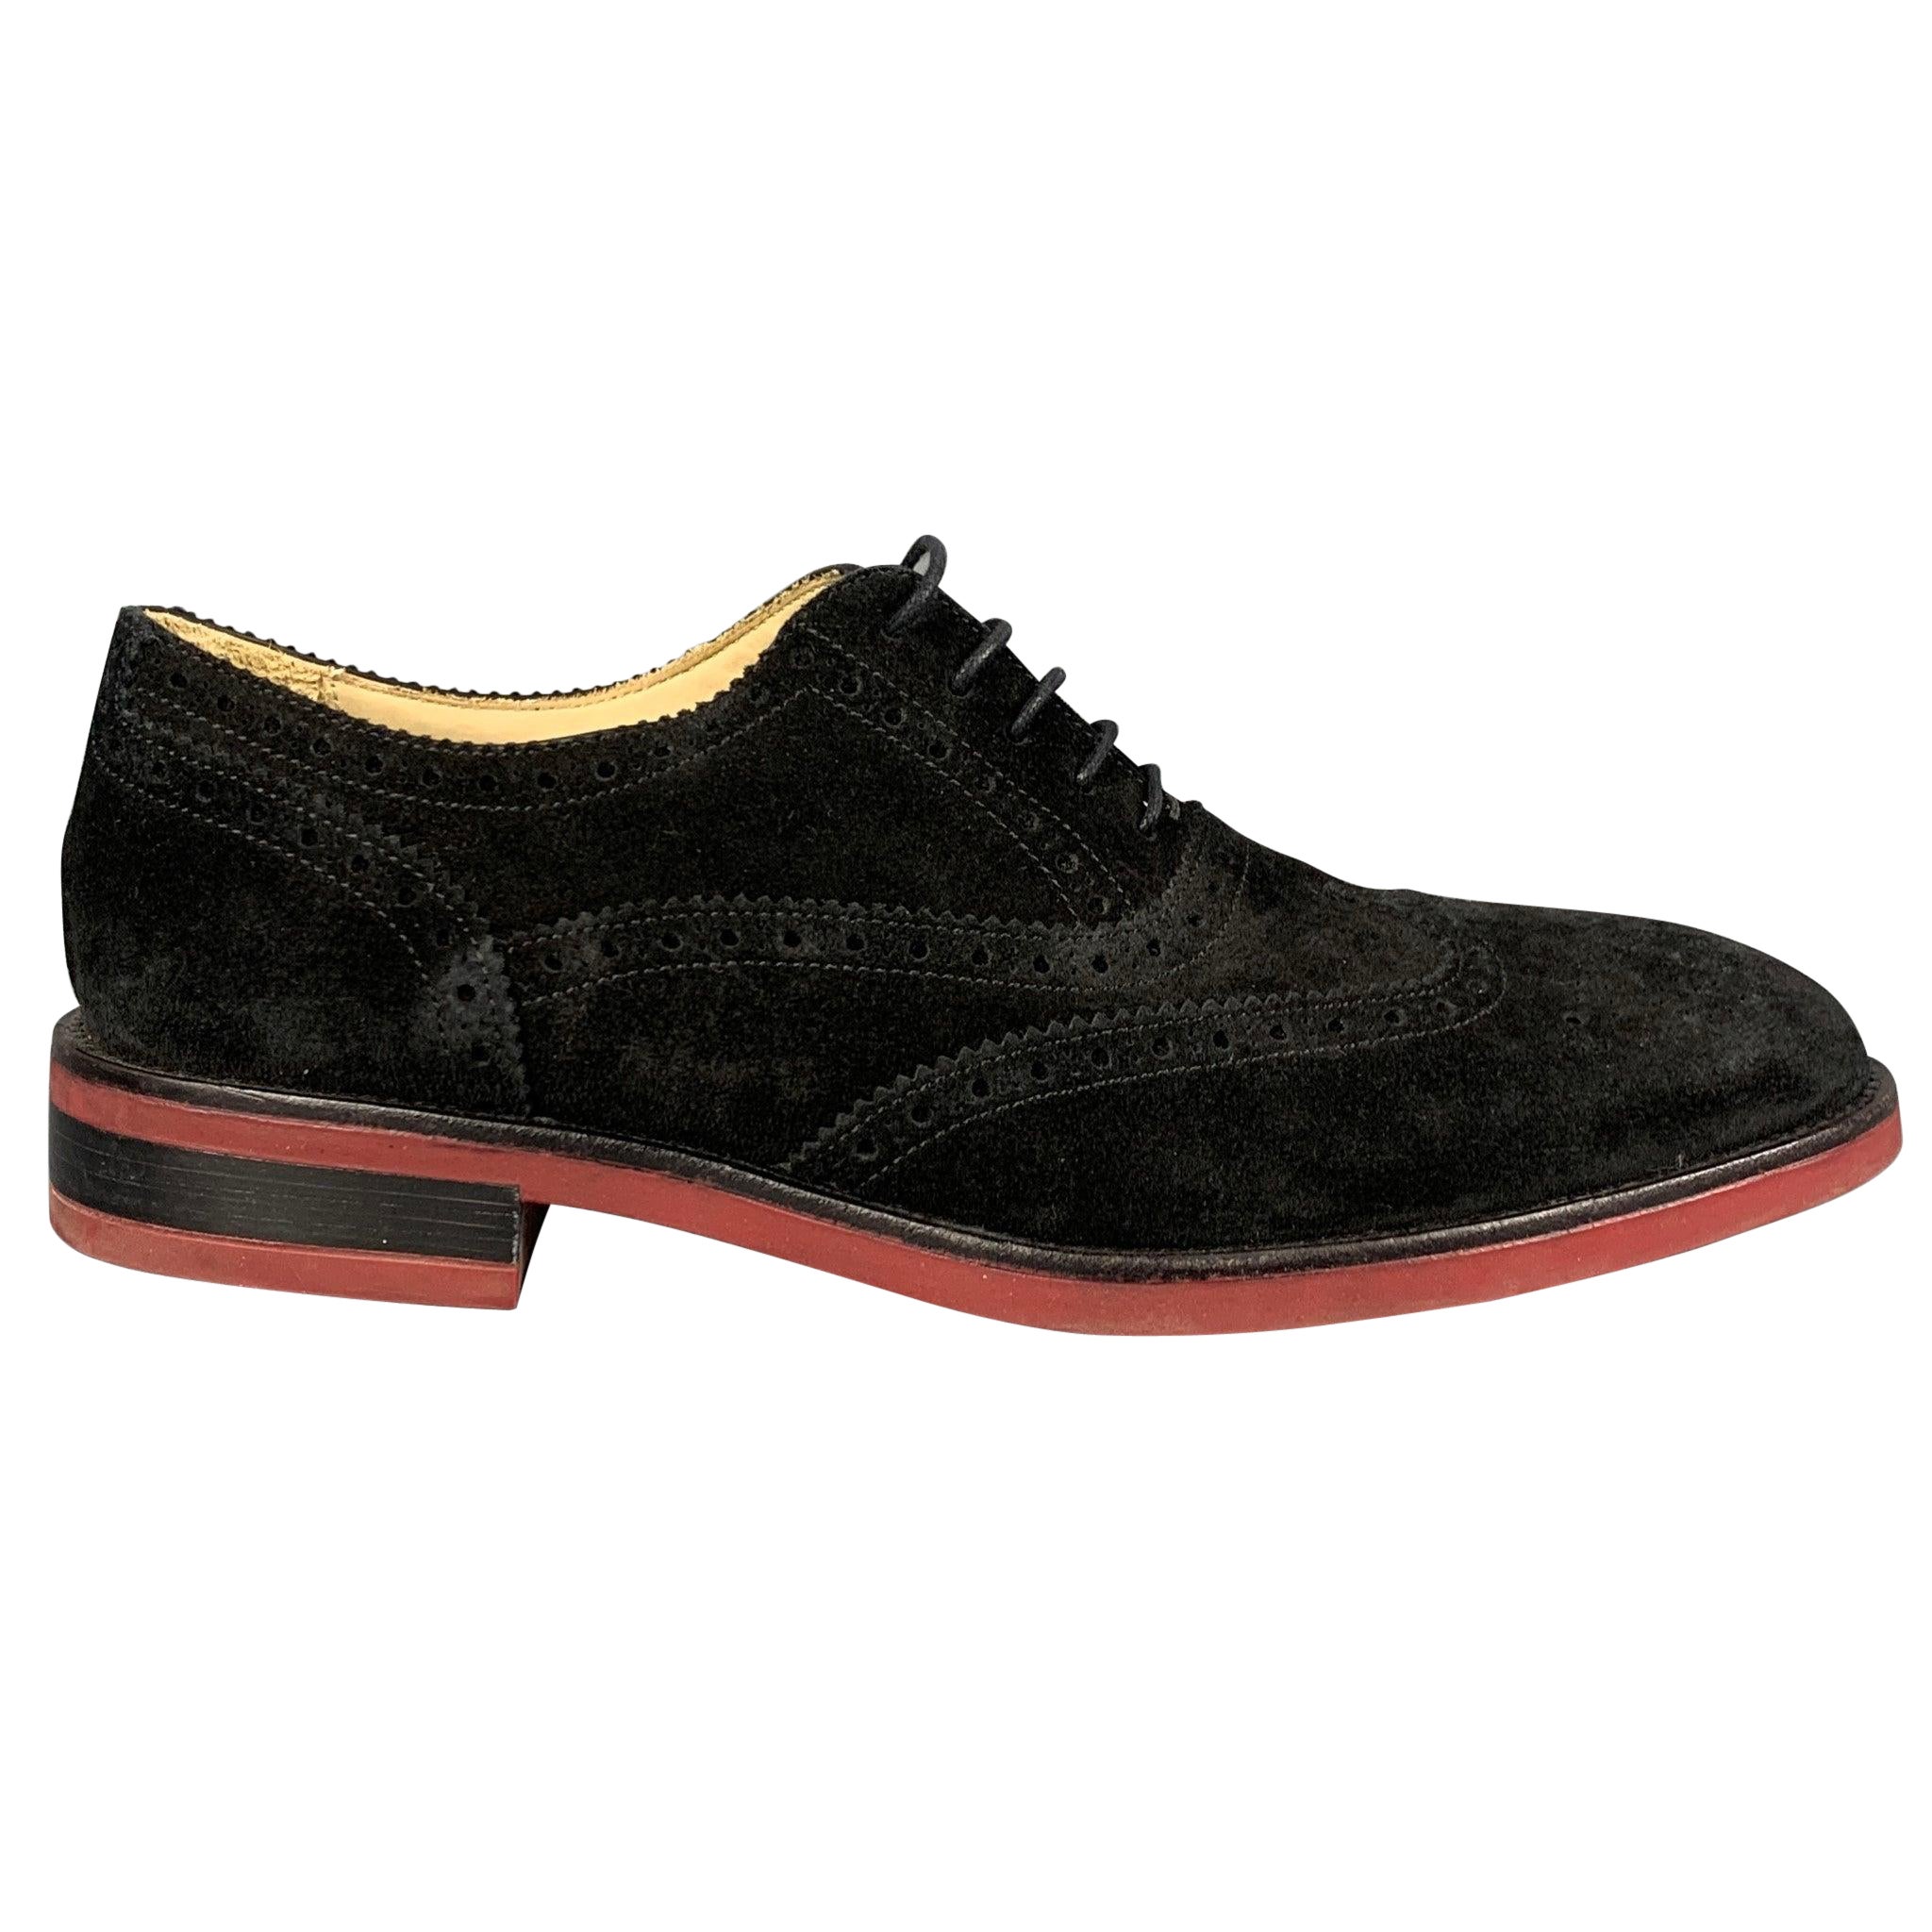 PAUL SMITH Size 10.5 Black Brick Perforated Leather Wingtip Loafers For Sale